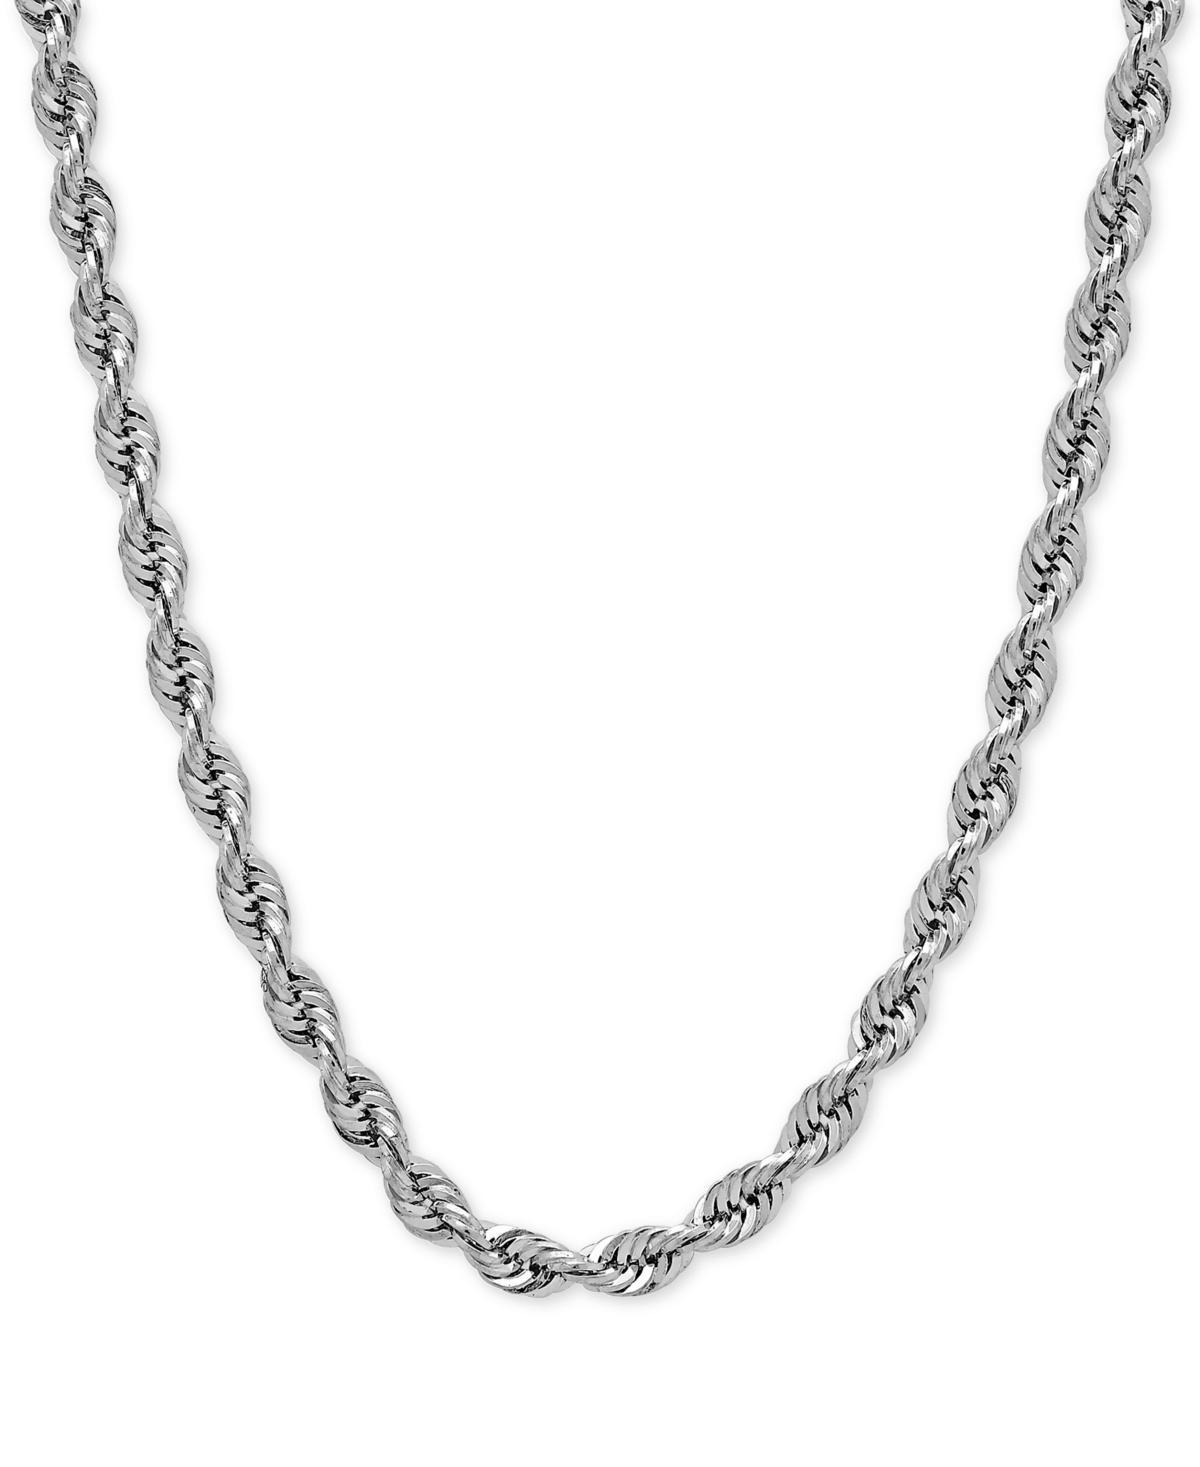 Rope Chain Slider Necklace in 14k White Gold - White Gold